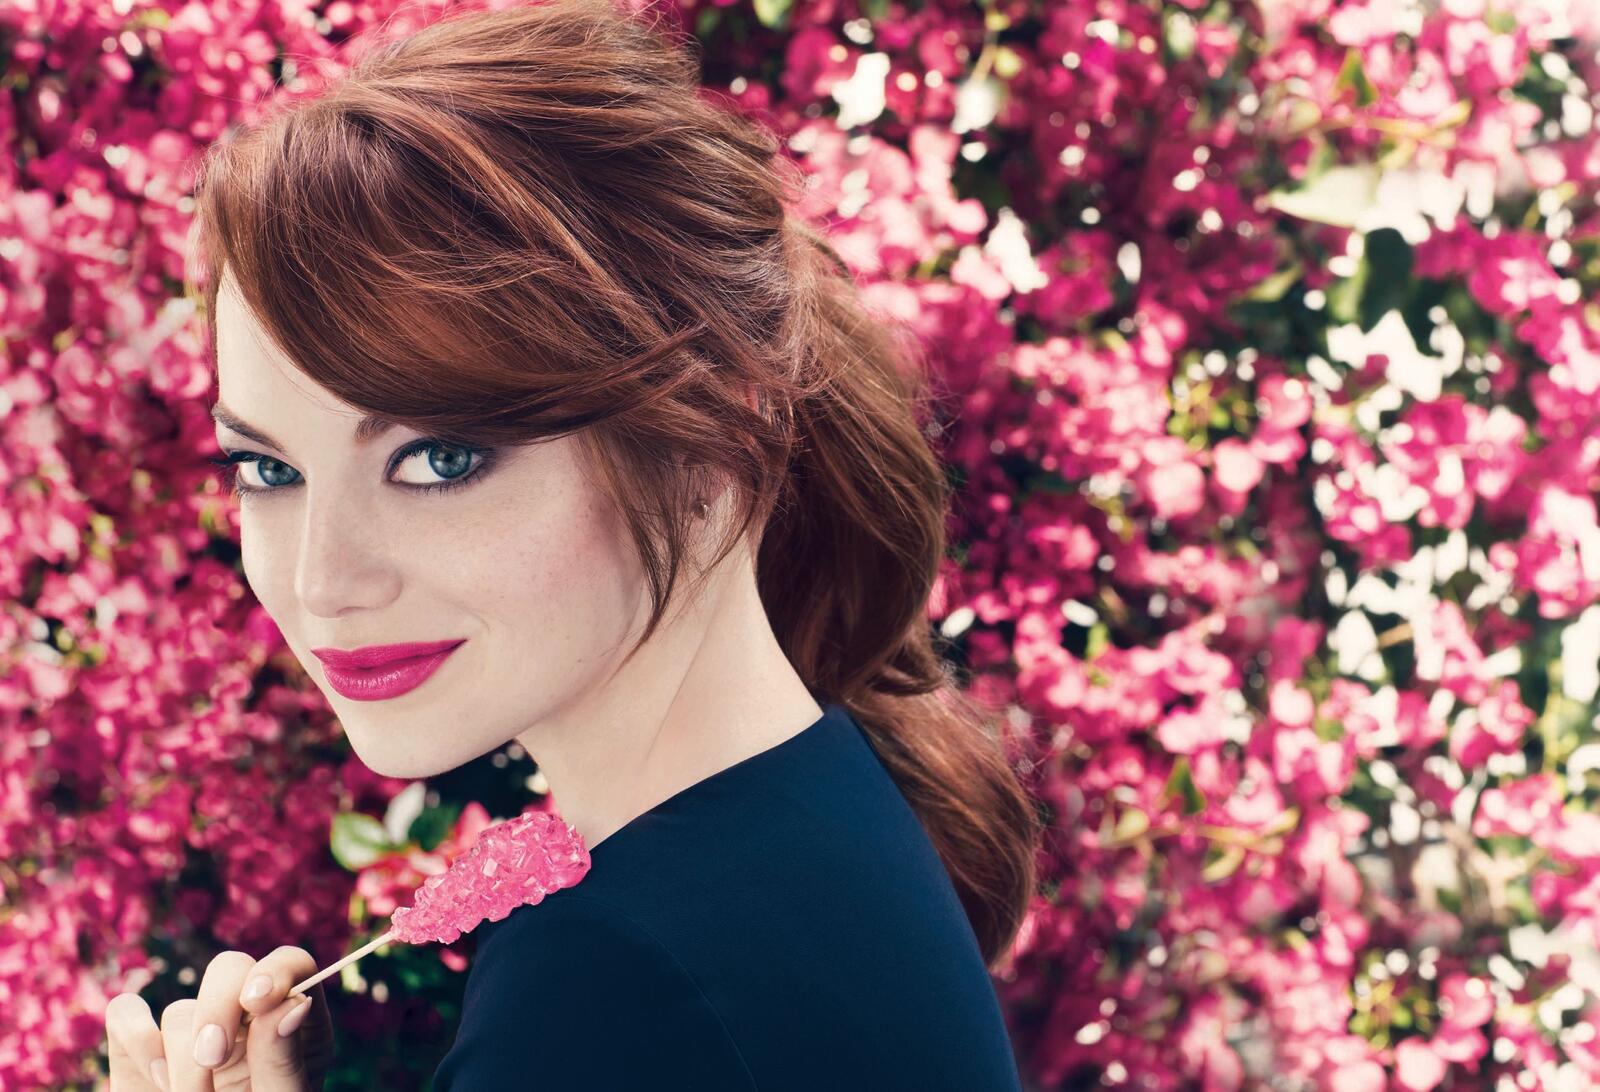 Wallpapers Emma Stone pink lipstick grin on the desktop